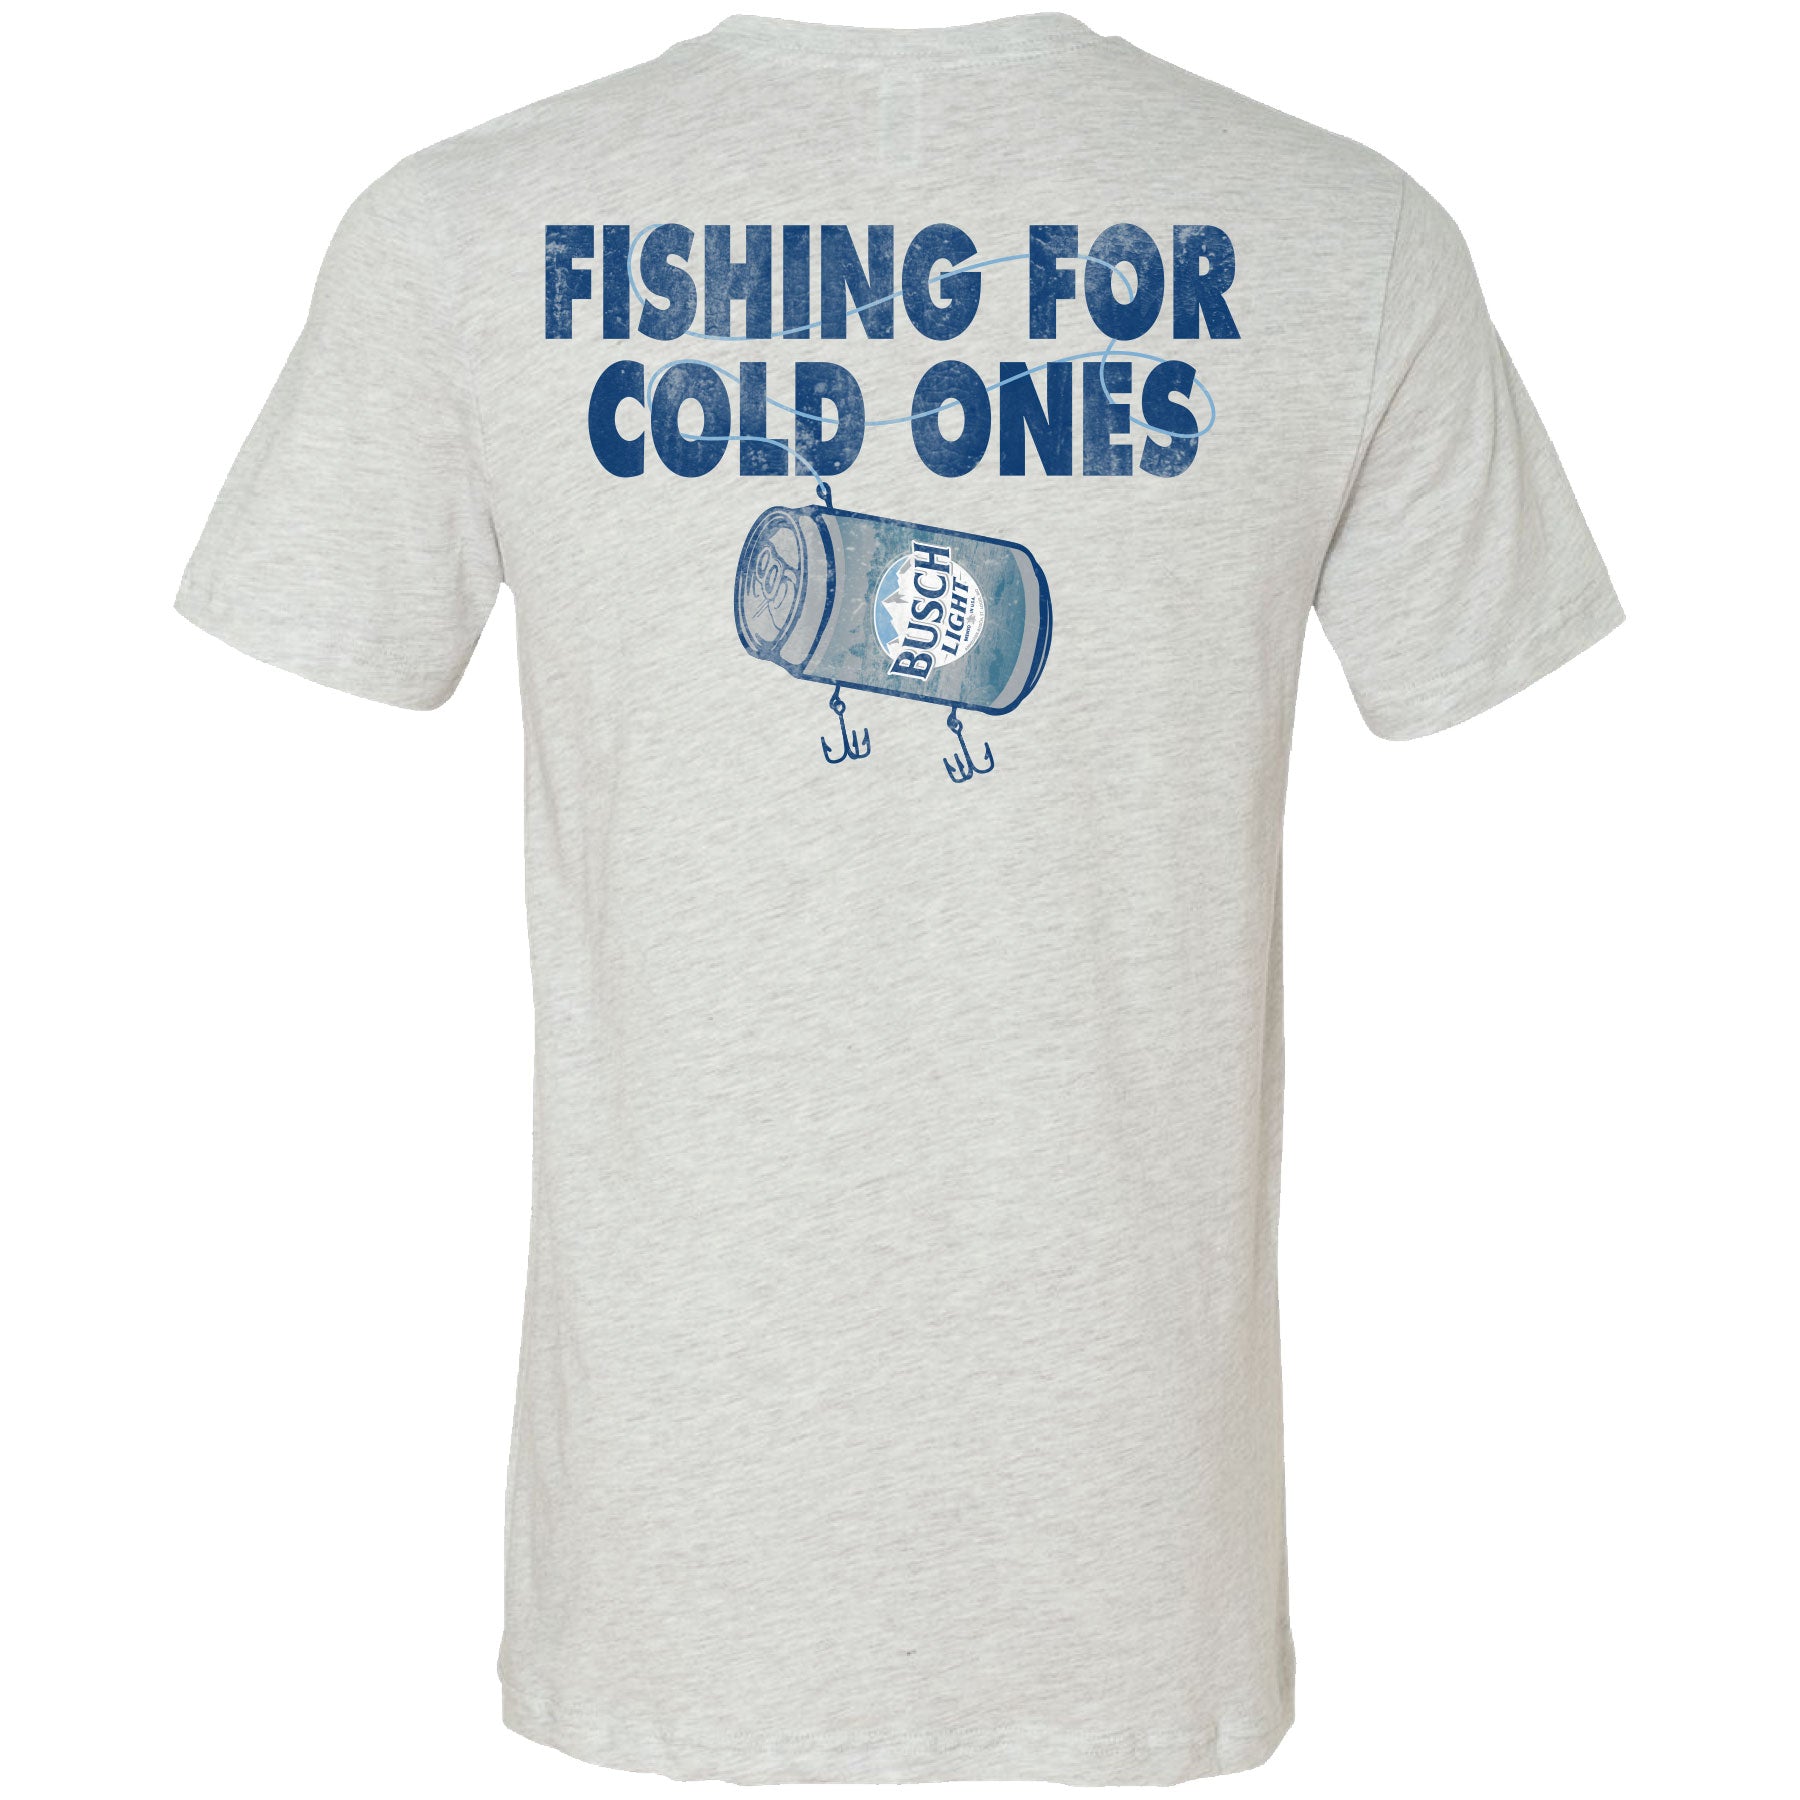 Busch Light Fishing - Fishing for Cold Ones - 2-Sided Ash / X-Large